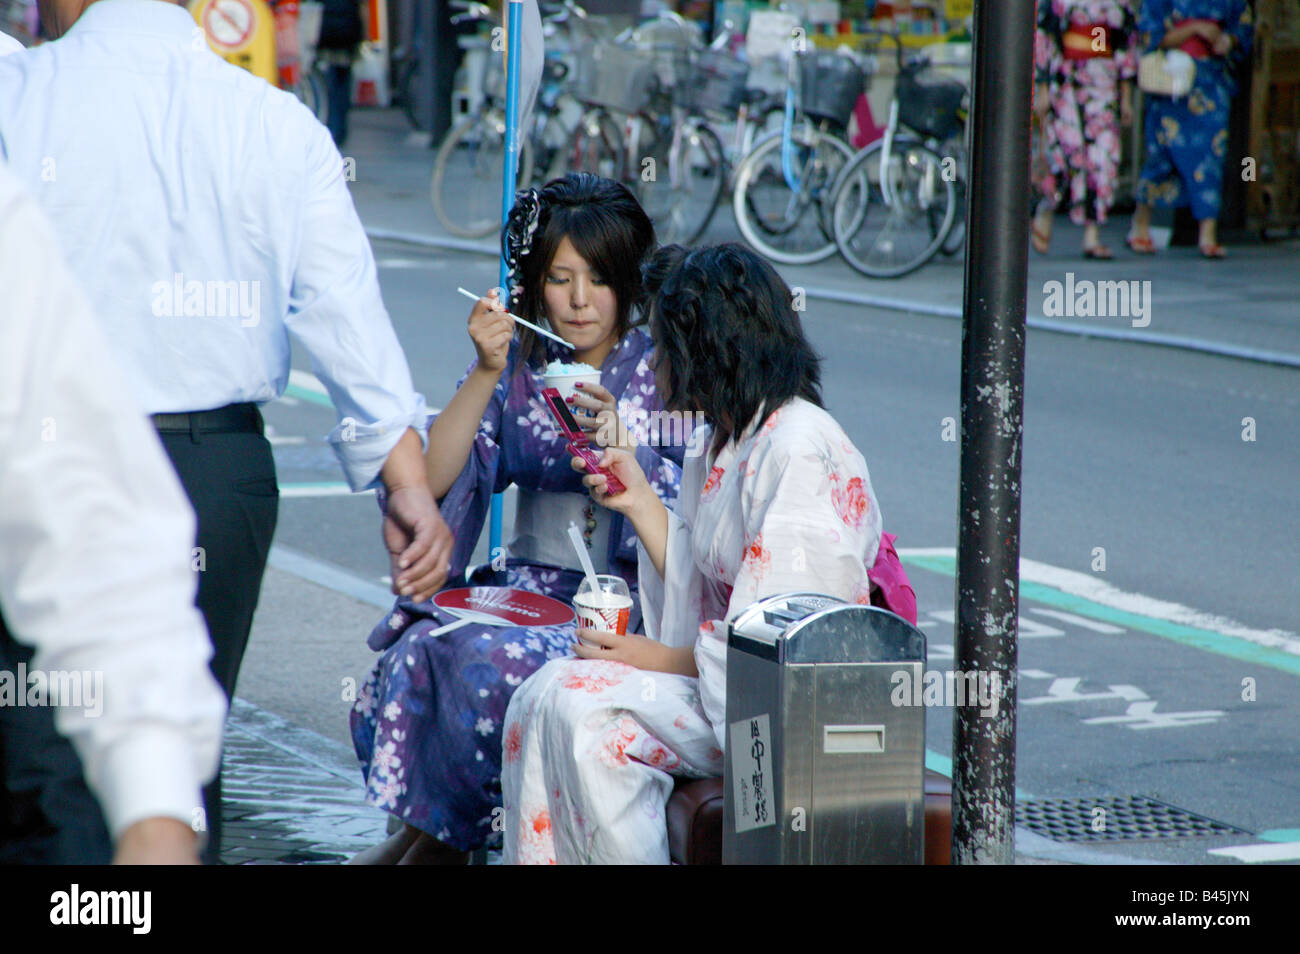 Two young Japanese girls wearing traditional kimonos outside in an urban setting Stock Photo